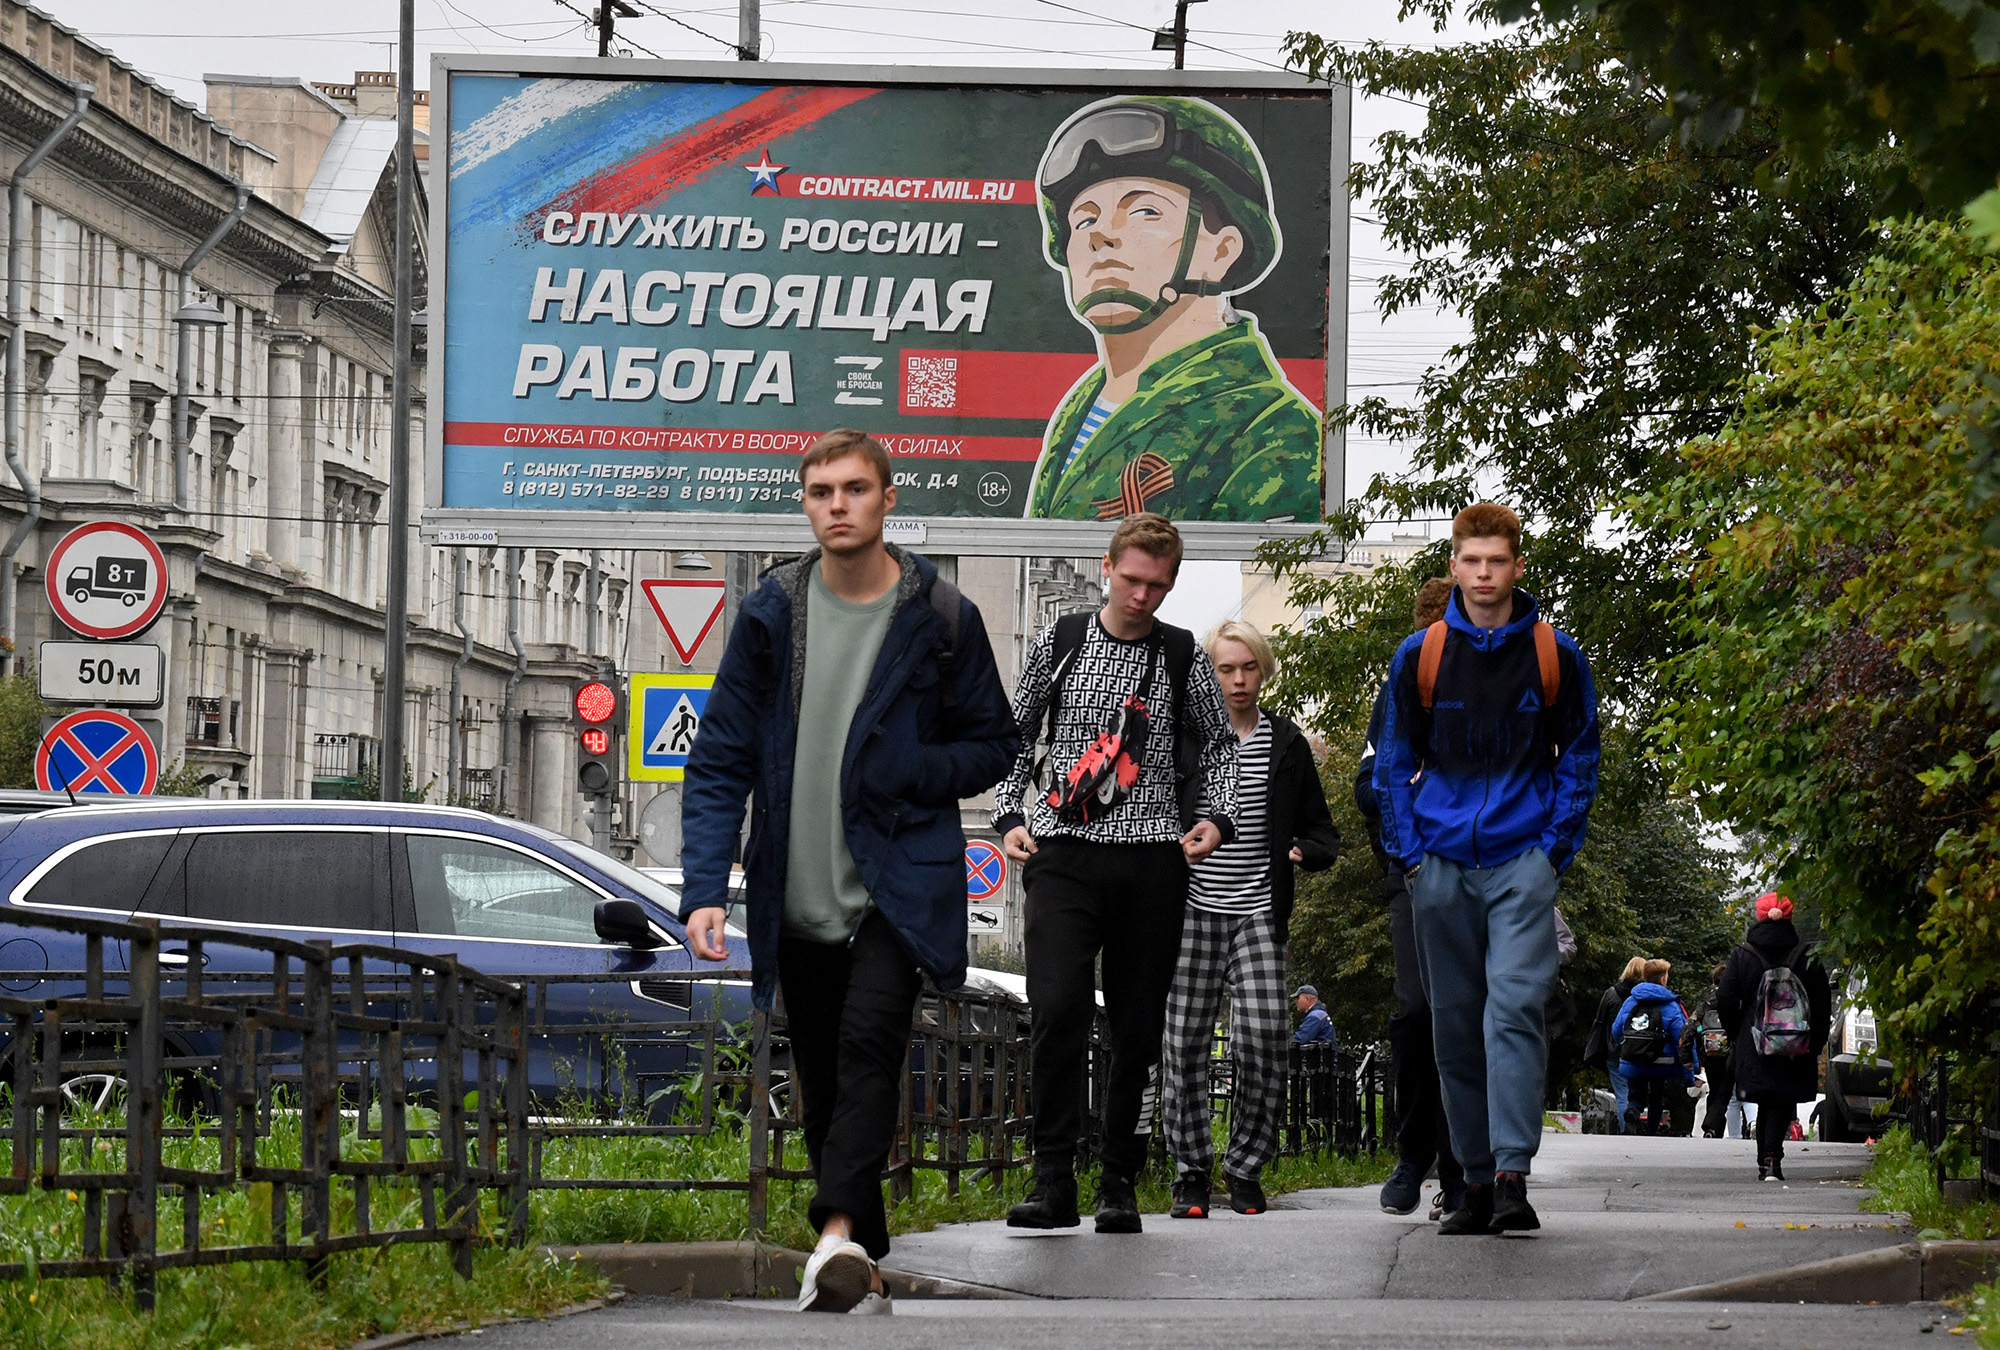 Young men walk in front of a billboard promoting contract army service in Saint Petersburg, Russia, on September 29.